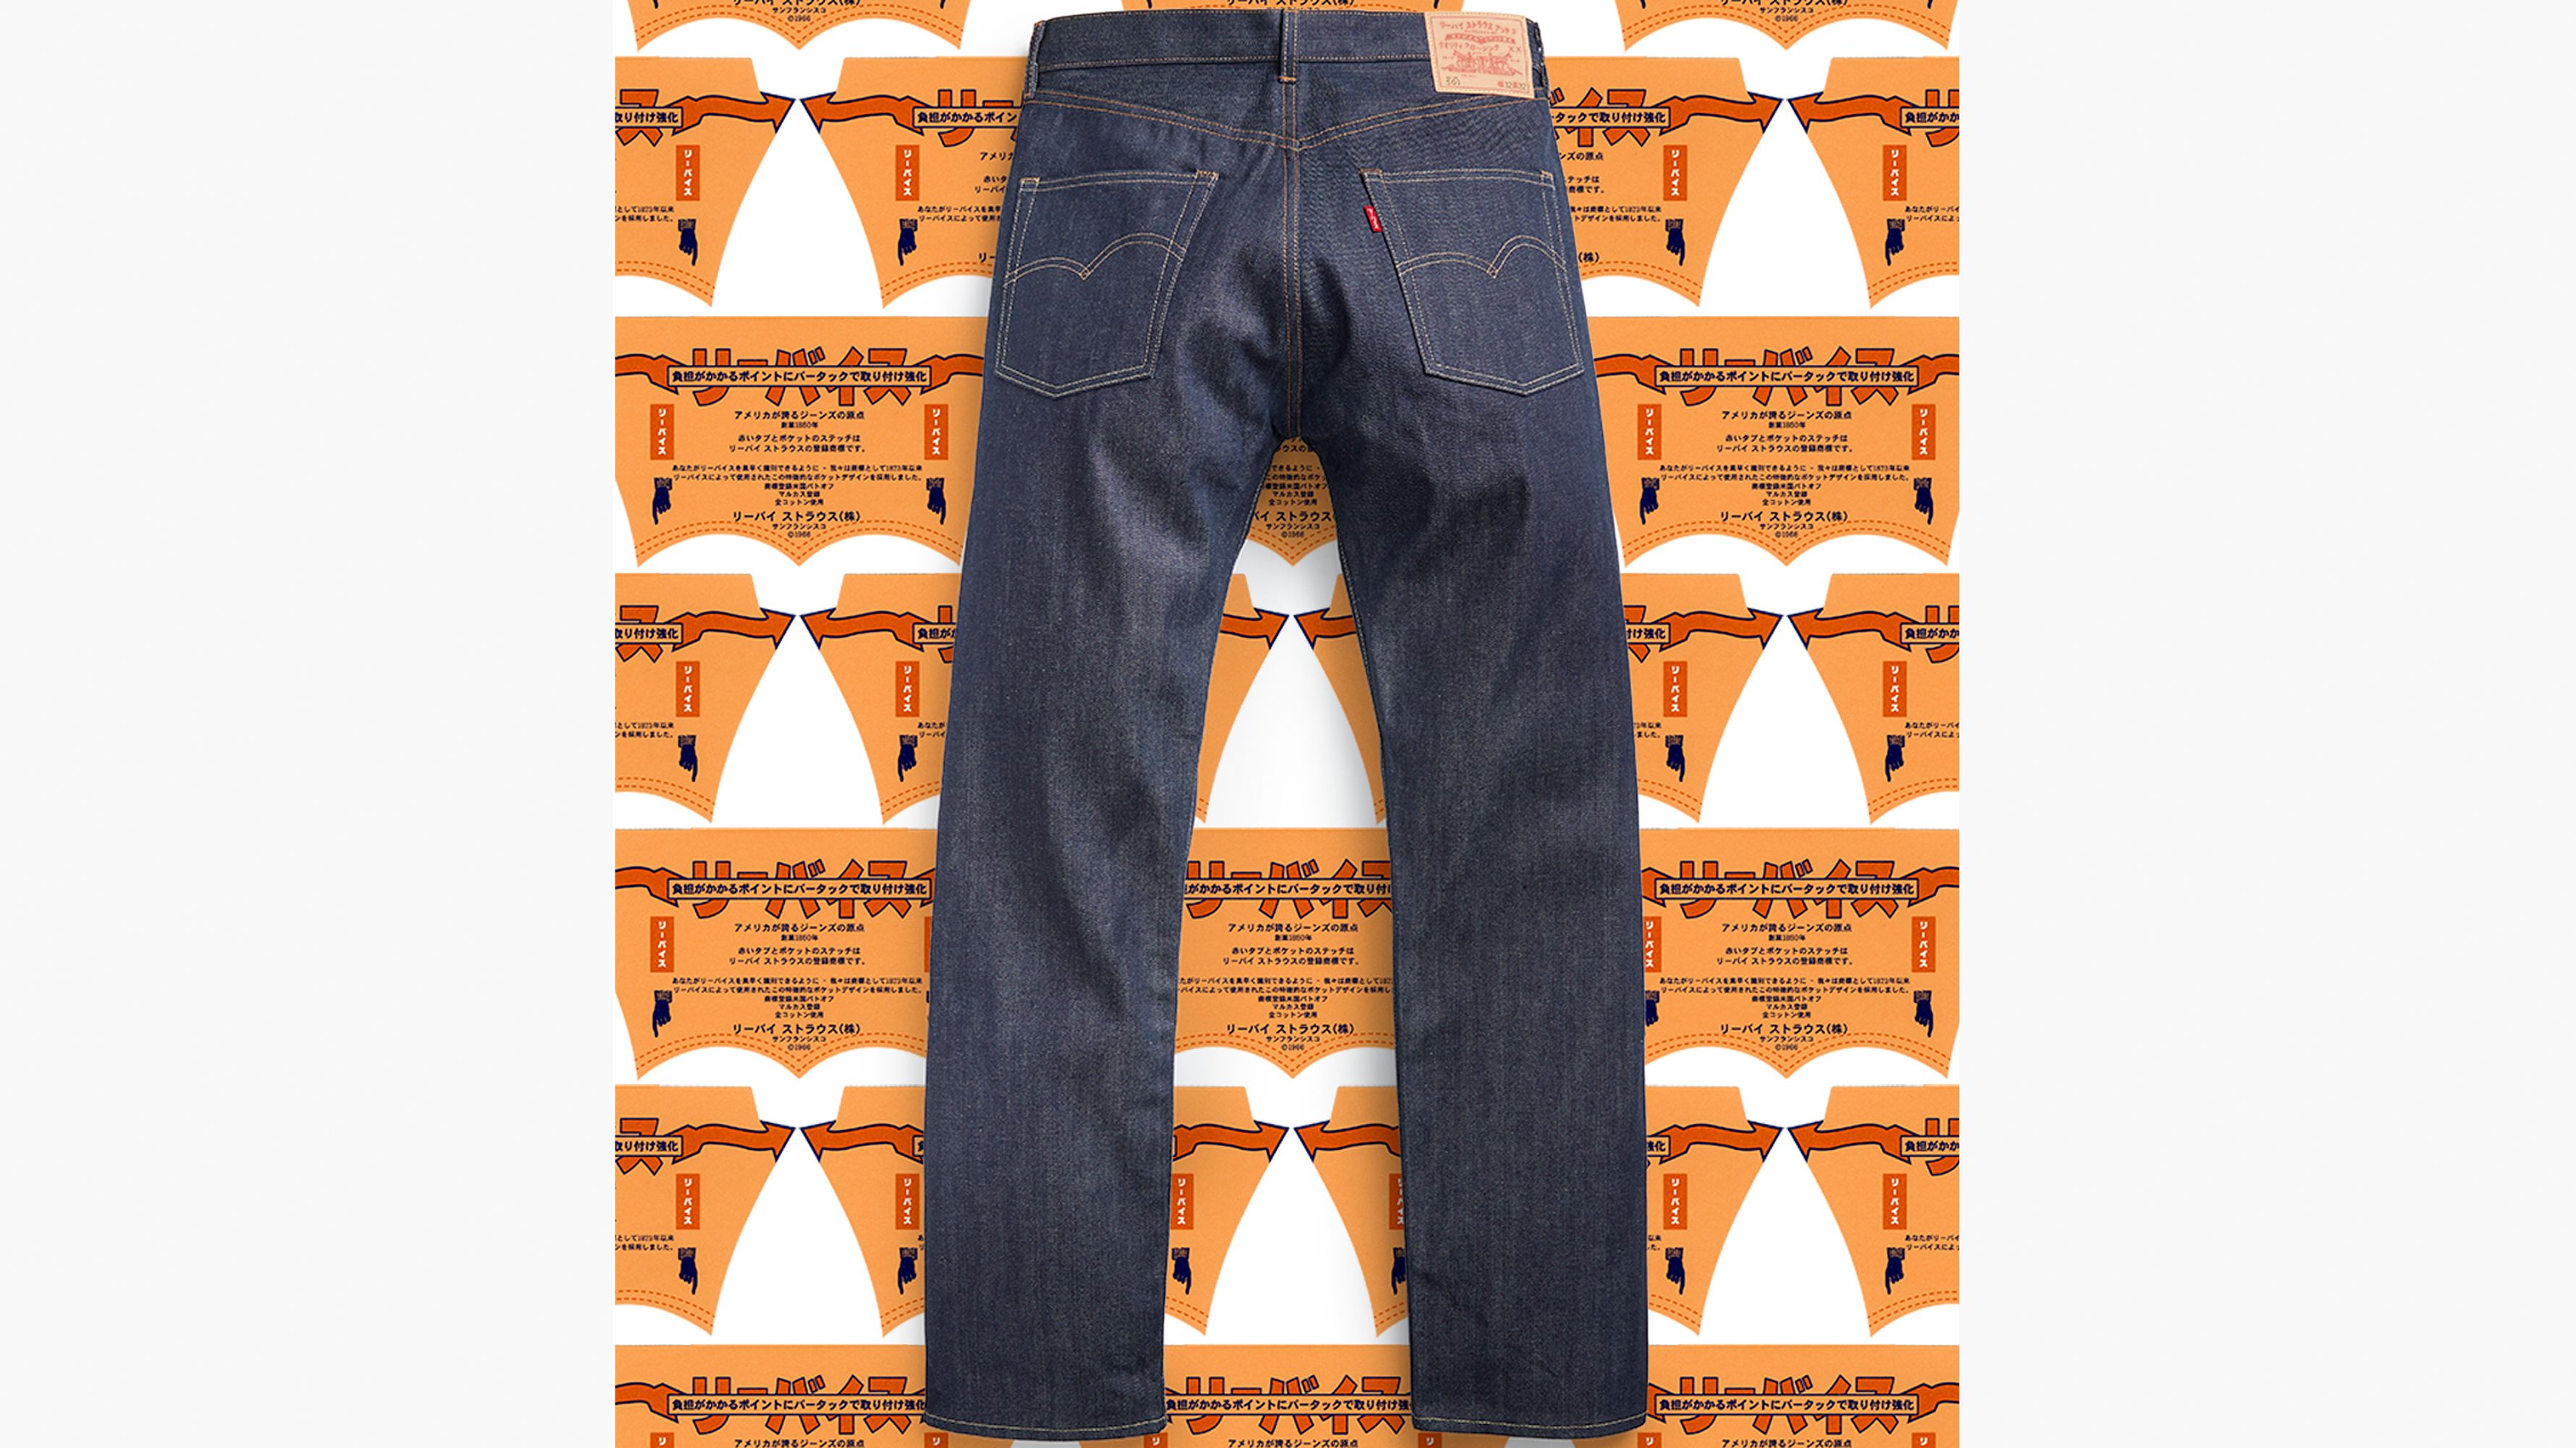 1966 501 jeans